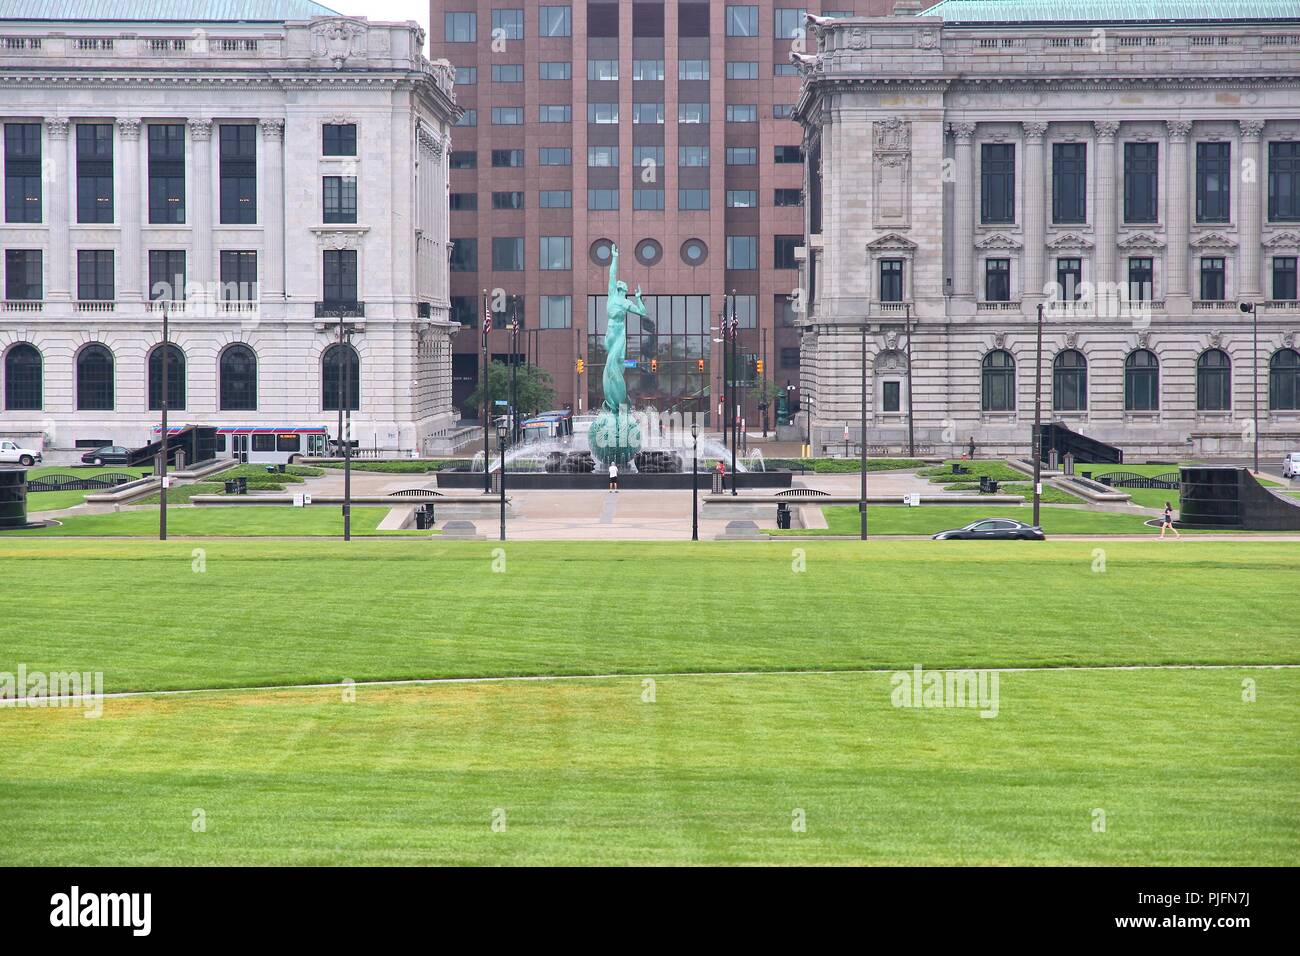 Cleveland, Ohio in the United States. Cleveland Mall - public park in downtown Cleveland. Stock Photo